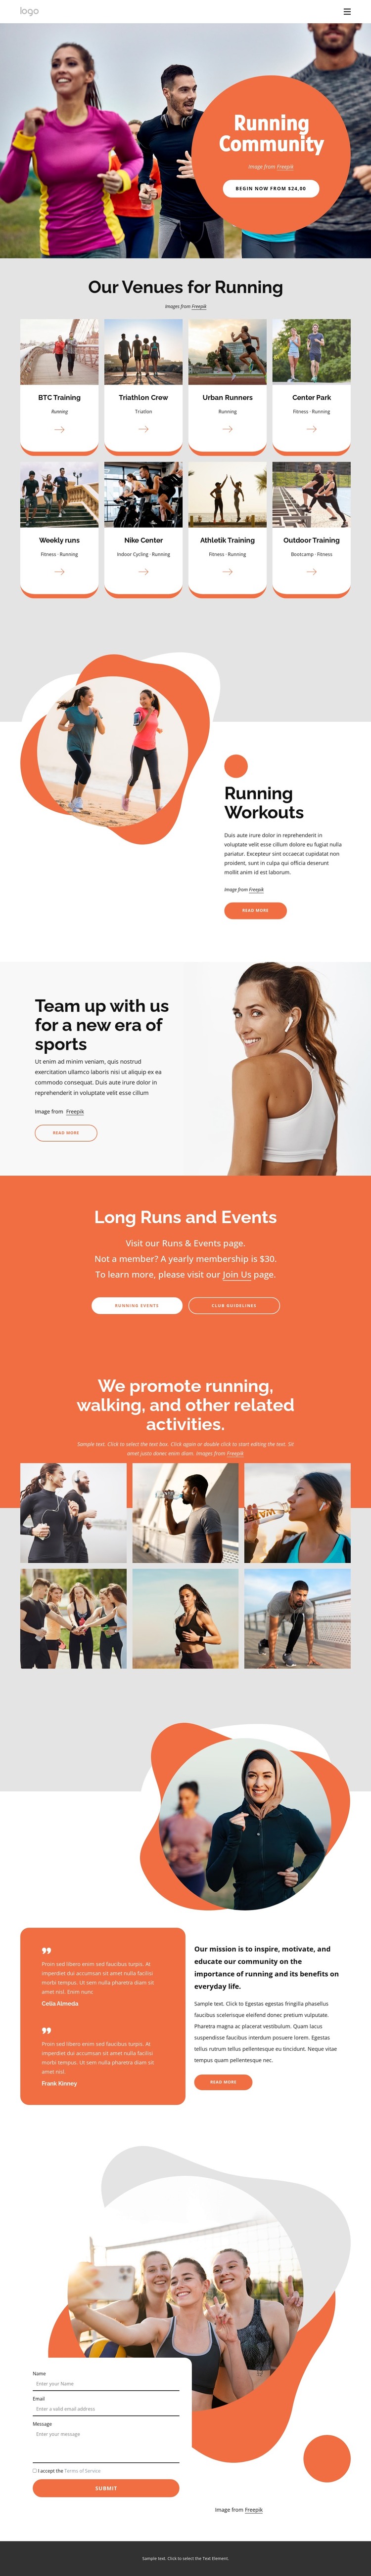 About Running Club Web Design